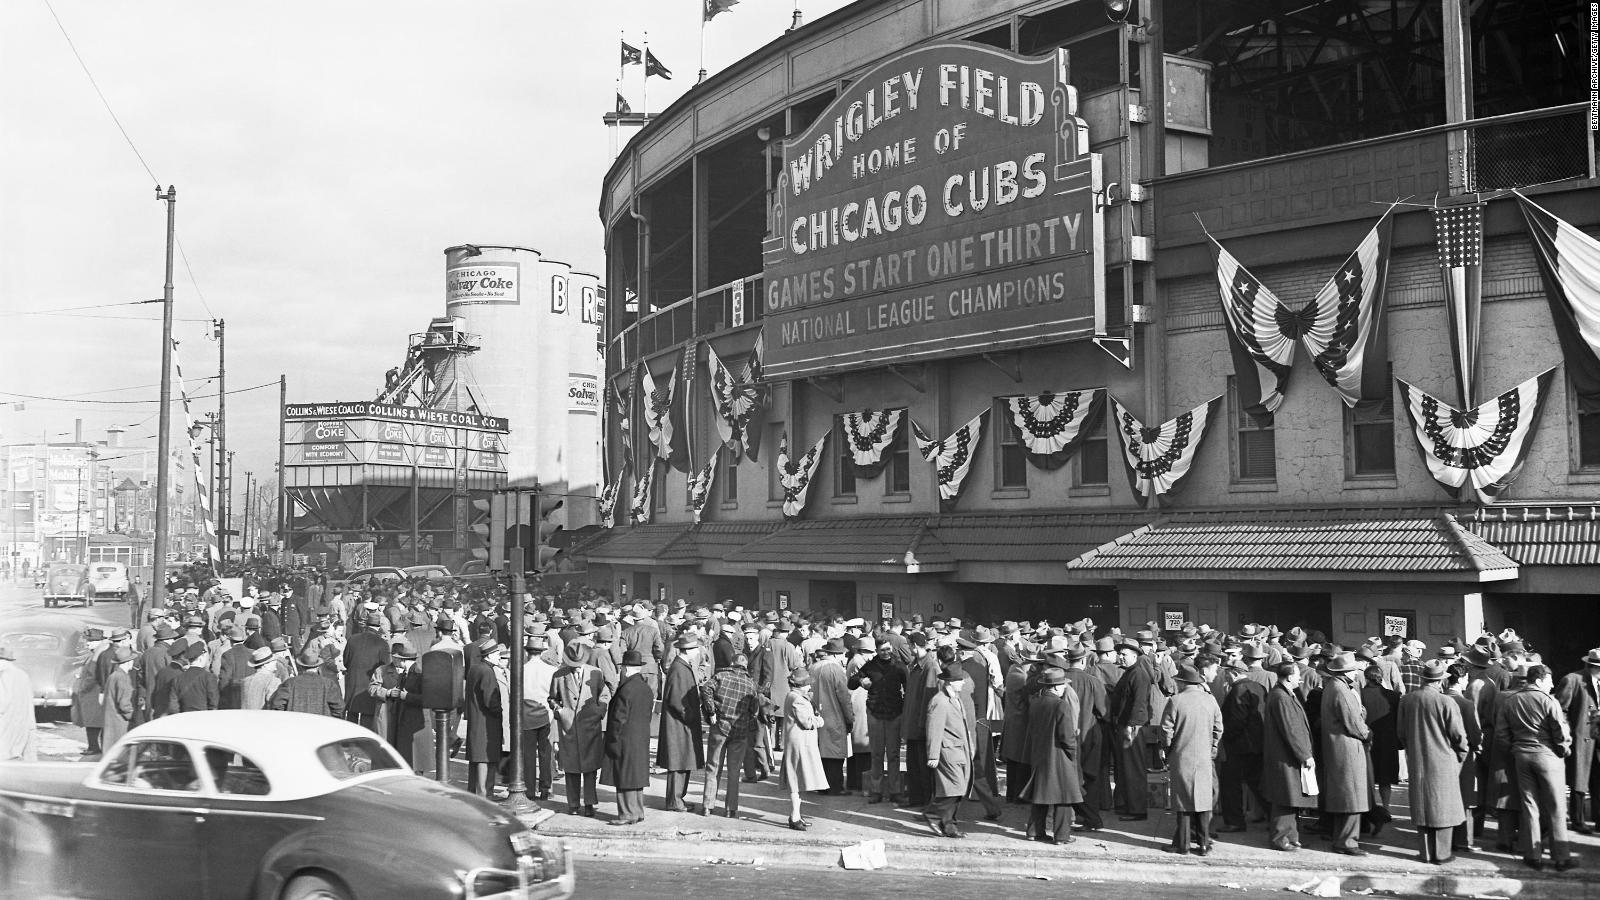 Wrigley Field, home of the Chicago Cubs, is officially designated as a